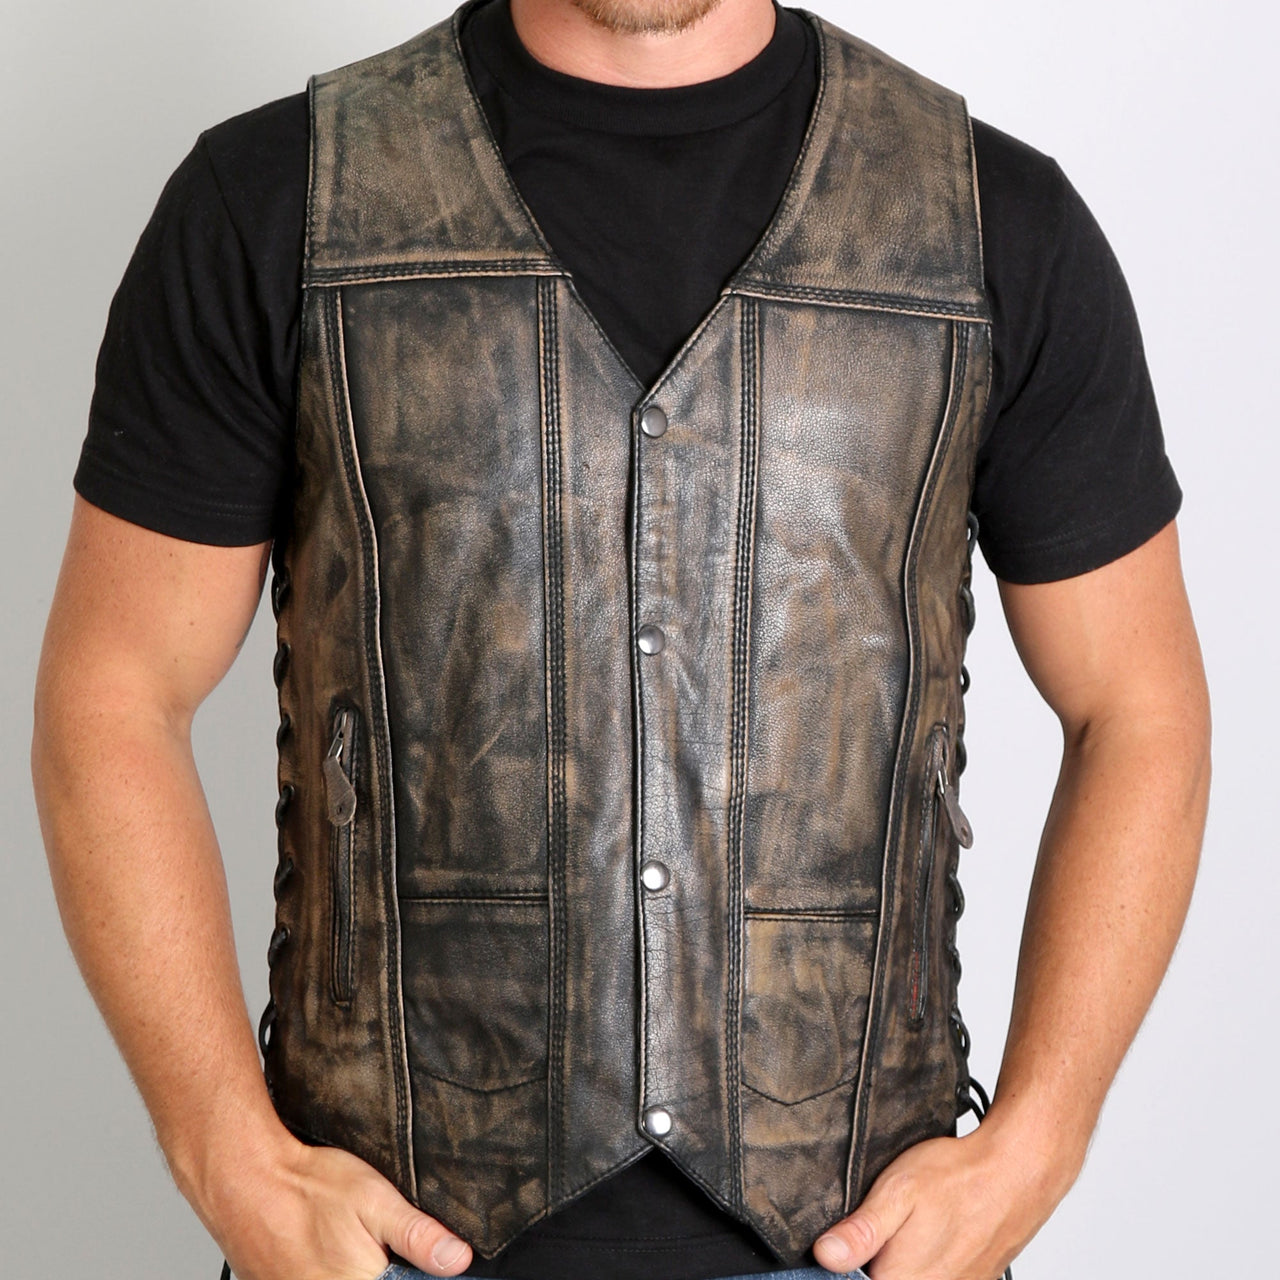 Hot Leathers VSM1029 Men's Distressed Brown 10 Pocket 'Conceal and Carry' Leather Vest